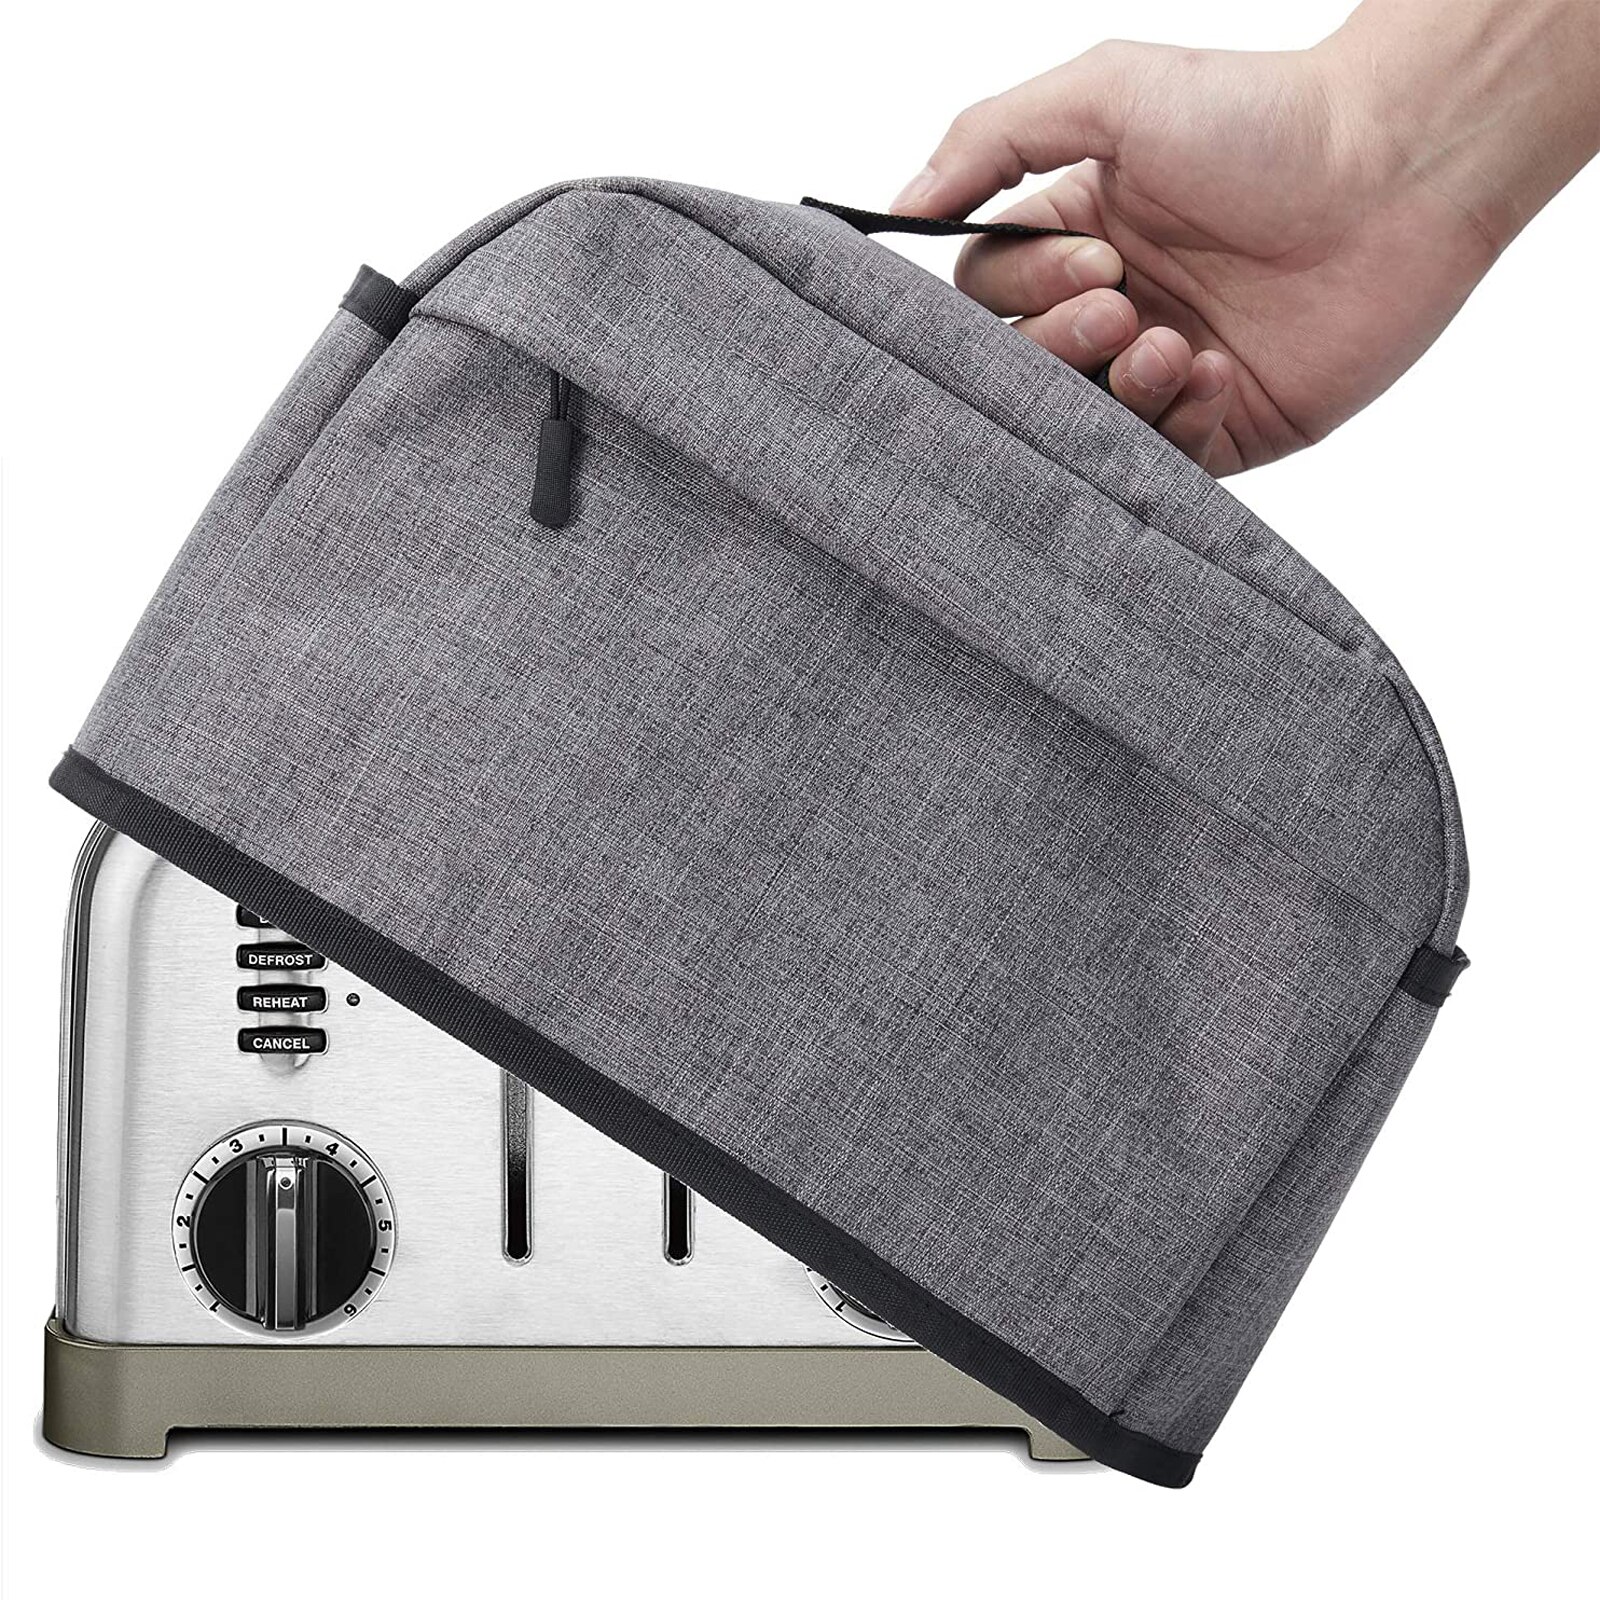 Toaster Dust Cover Anti-dust 4 Slice Toaster Covers with Zipper and Pockets Kitchen Small Appliance Cover with Handle